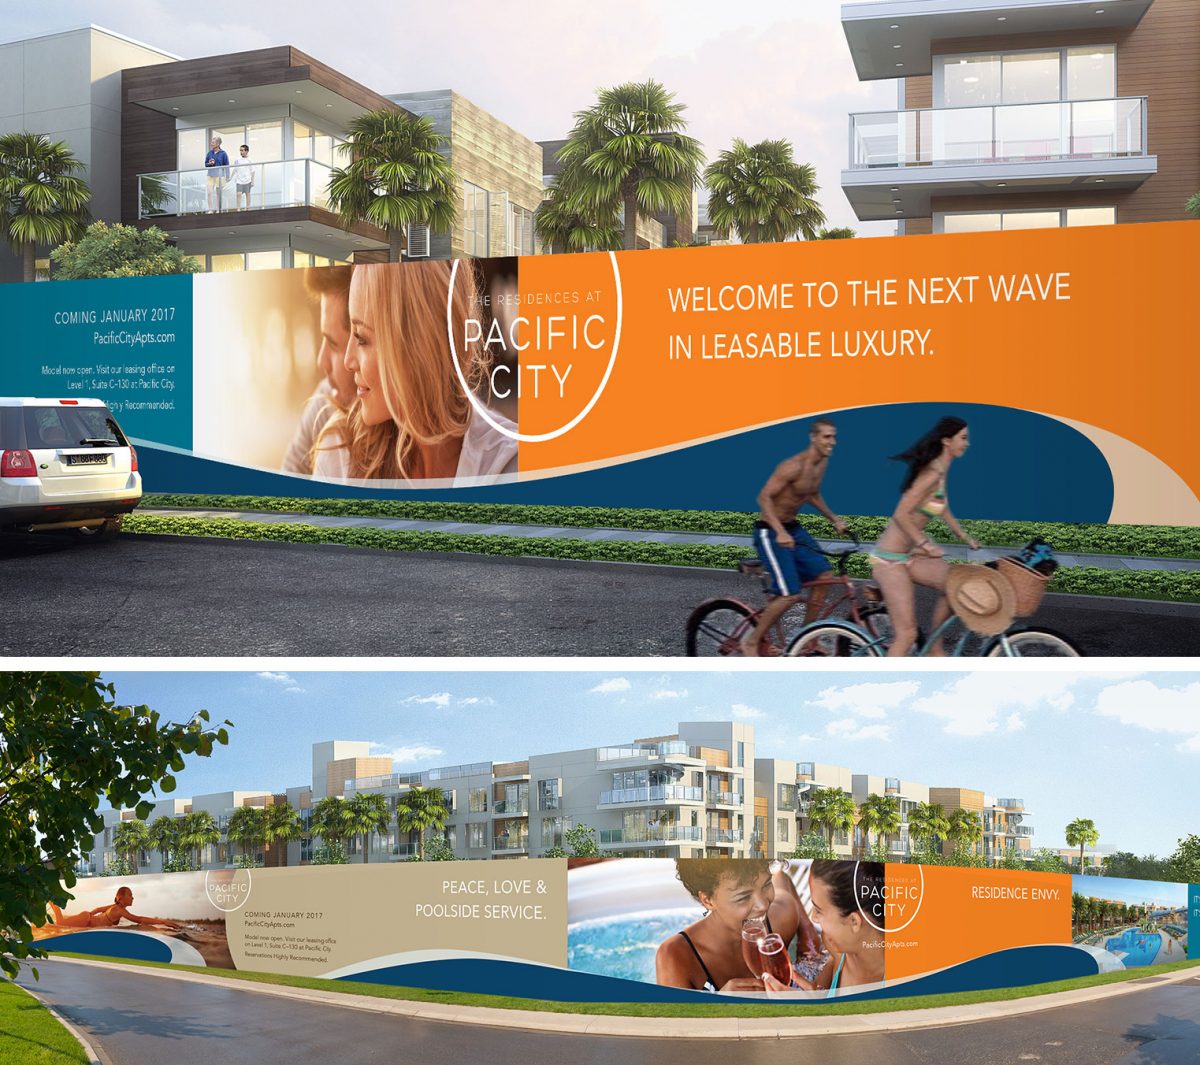 Rendering of OOH Marketing Fence around the Residences at Pacific City construction site, using Lifestyle photos, bright colors and playful copy